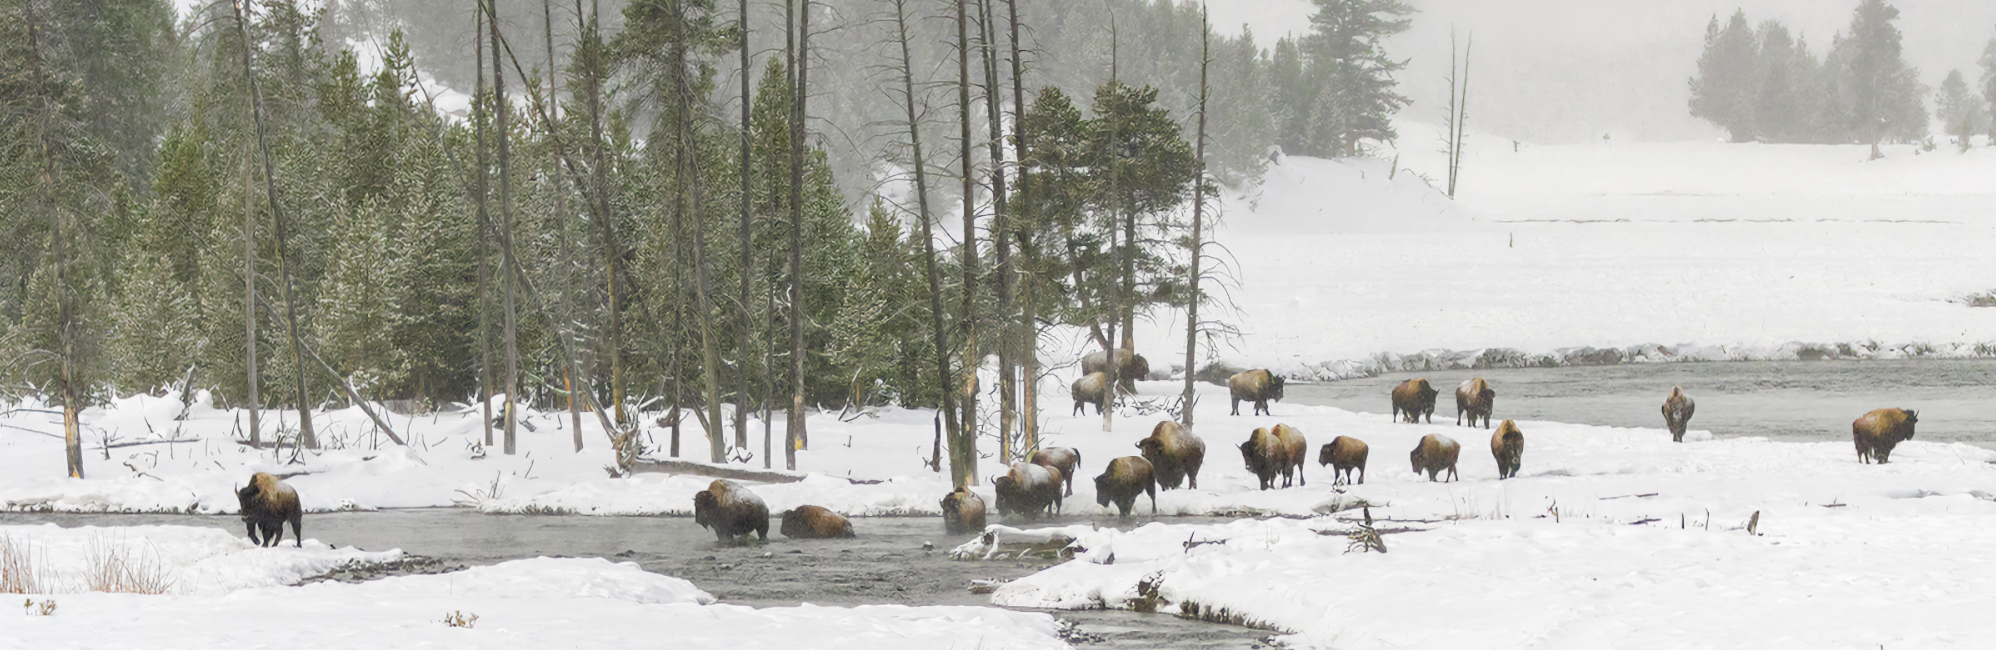 Featured in Studio E / "Six Views of Yellowstone" photography series